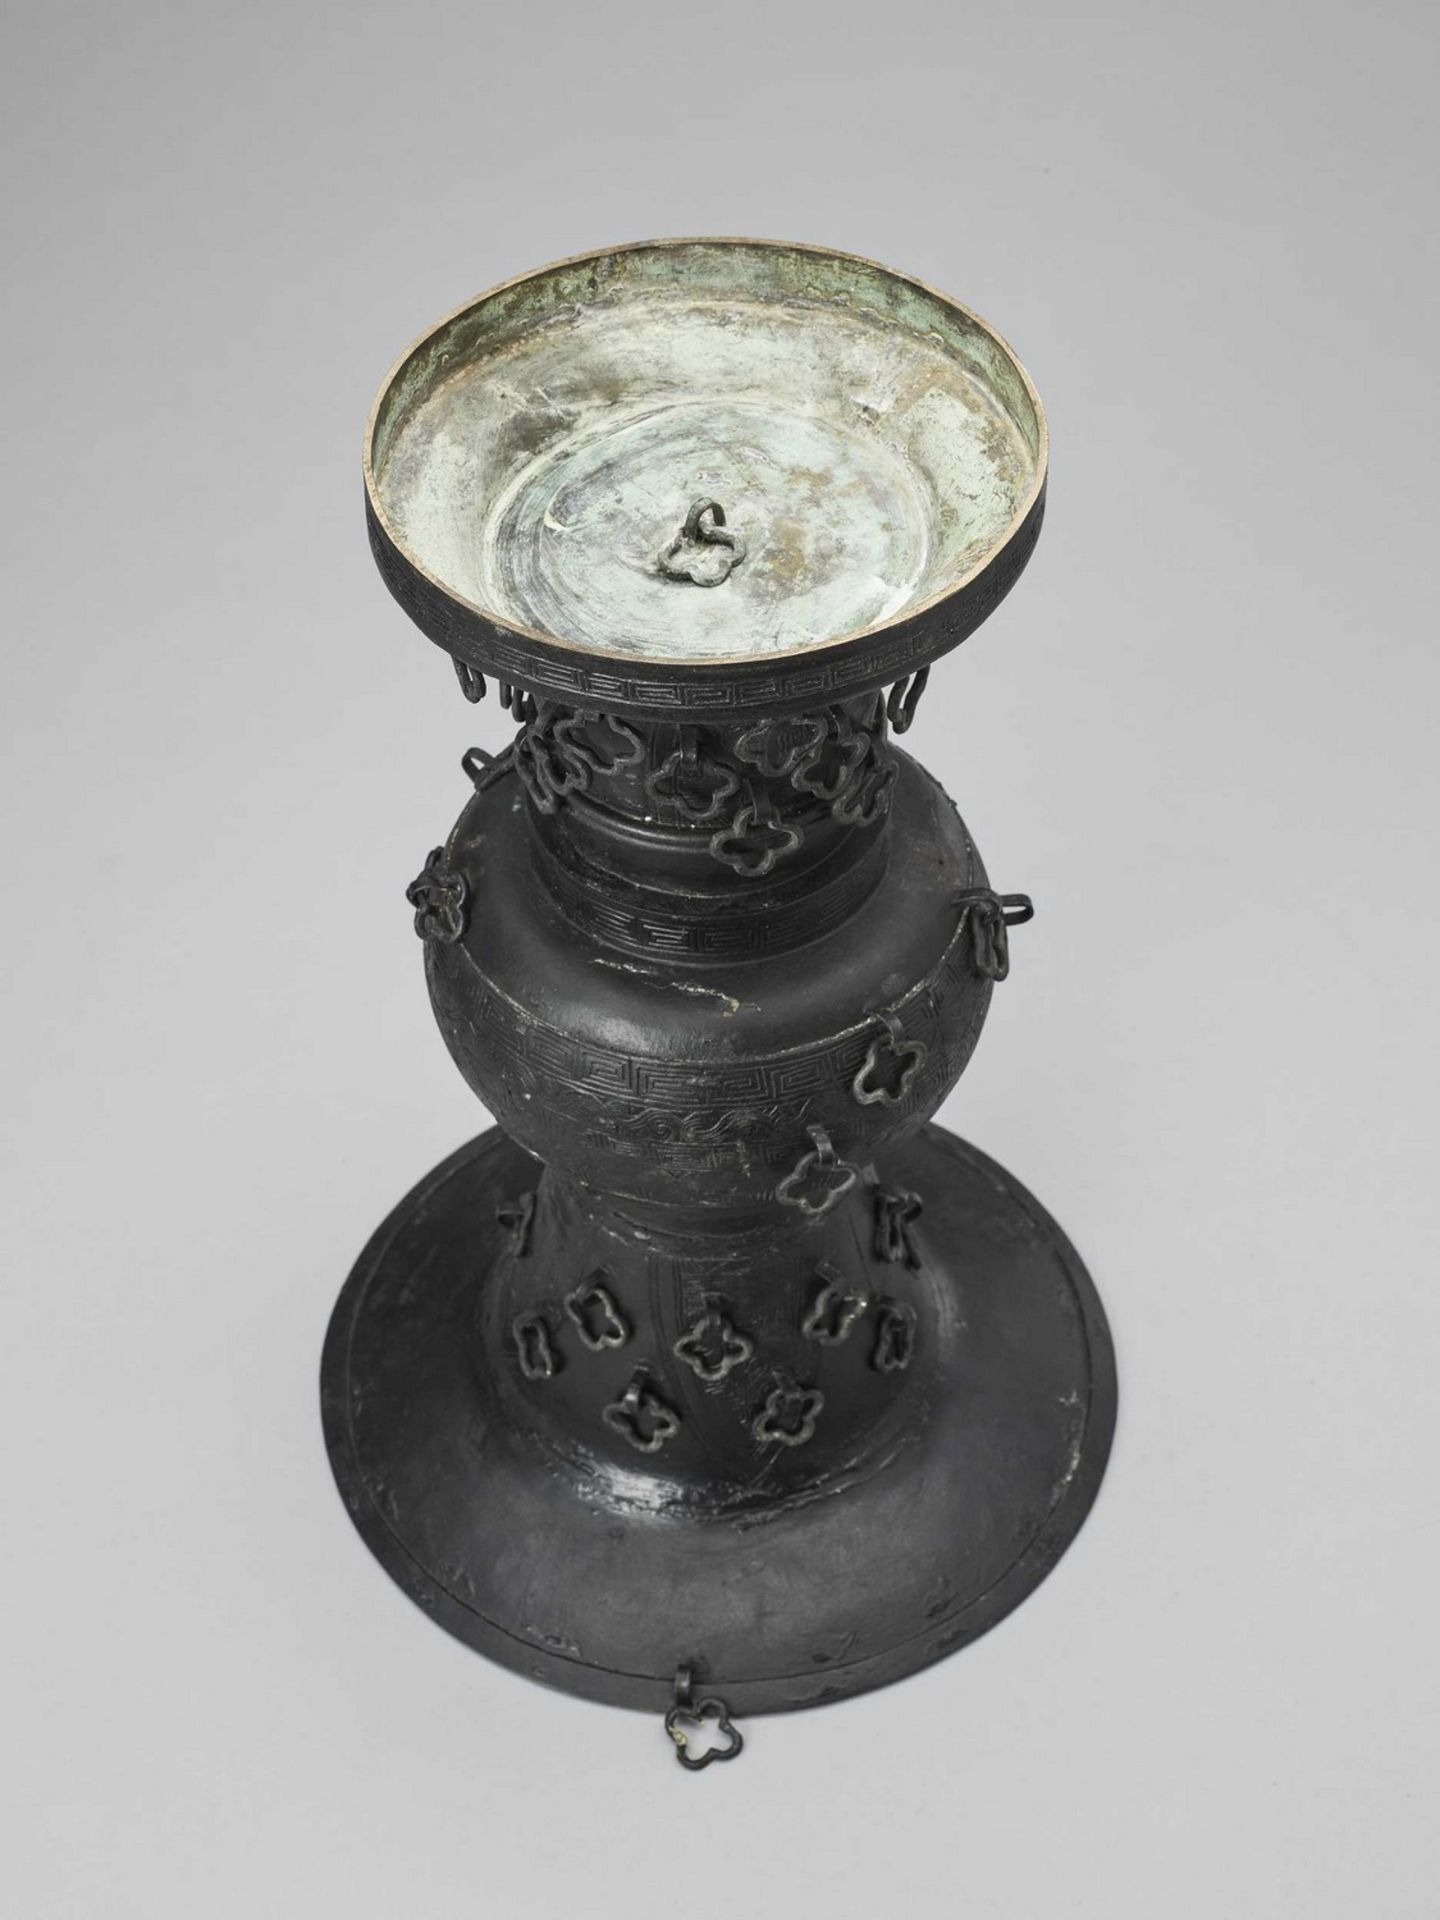 A PAIR OF METAL ALLOY ARCHAISTIC YEN YEN VASES, LATE QING TO REPUBLIC - Image 7 of 10